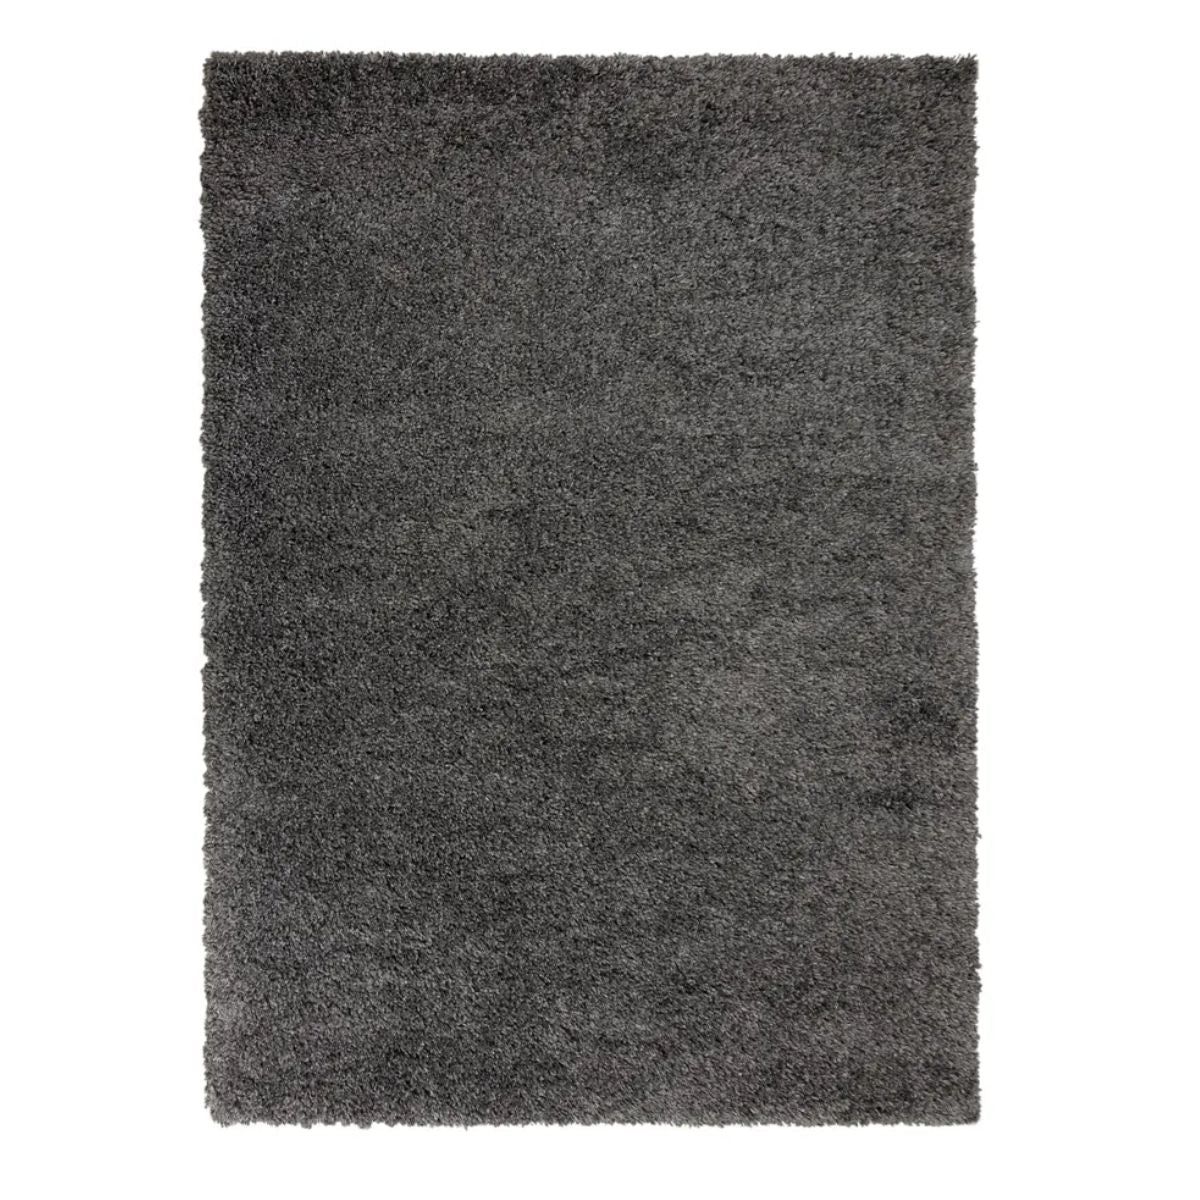 Tapis shaggy Sparks Anthracite 200x290cm